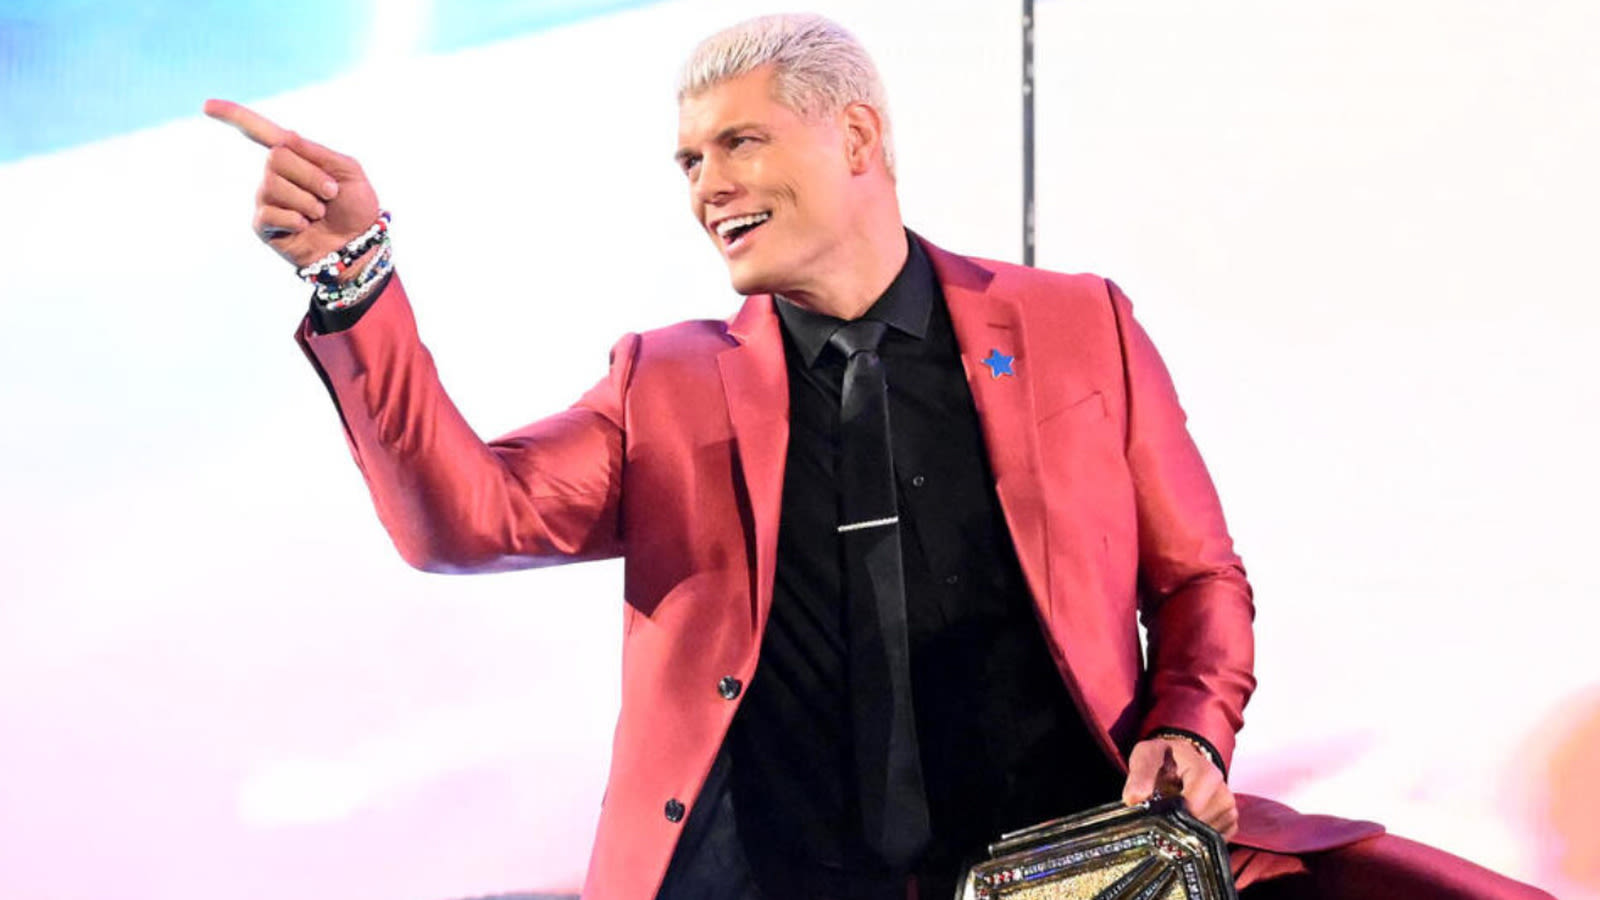 Cody Rhodes Addresses WWE Raw Exit After Winning Undisputed WWE Championship - Wrestling Inc.